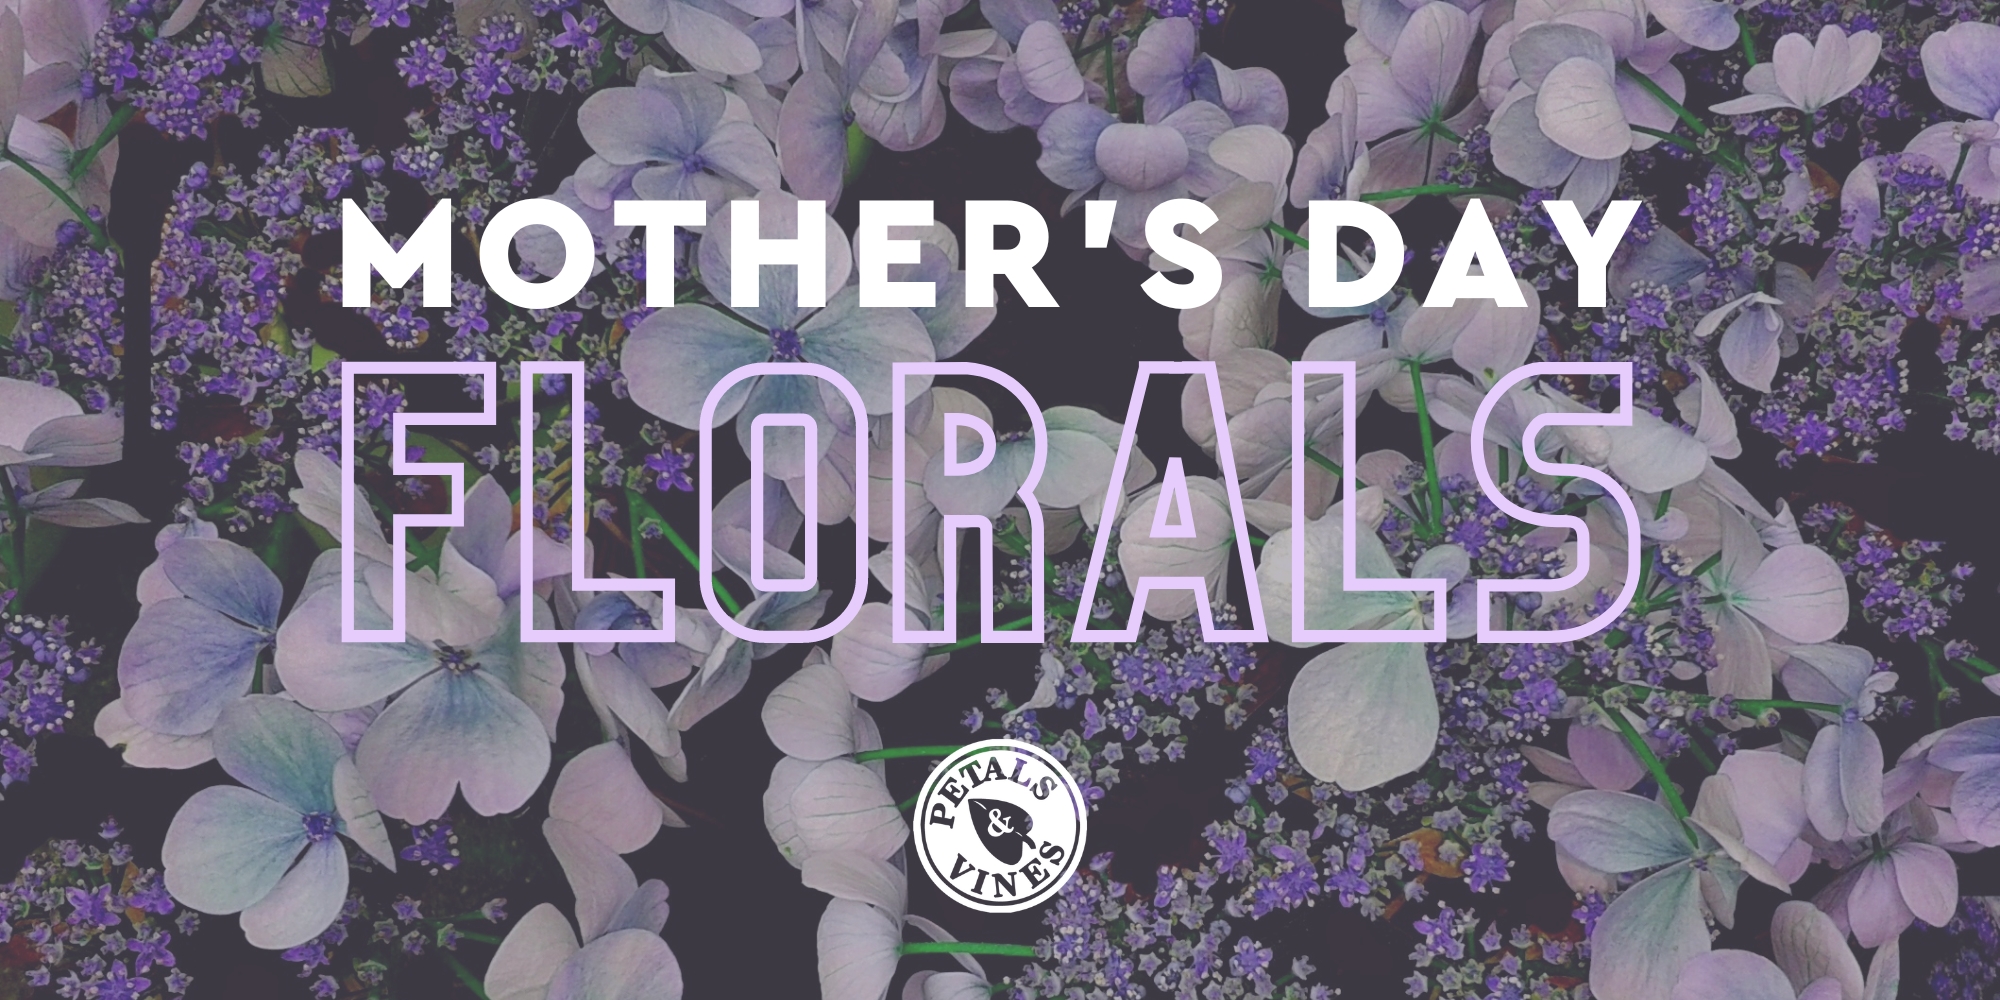 Mother's Day Floral Workshop in Willamette Valley wine country.